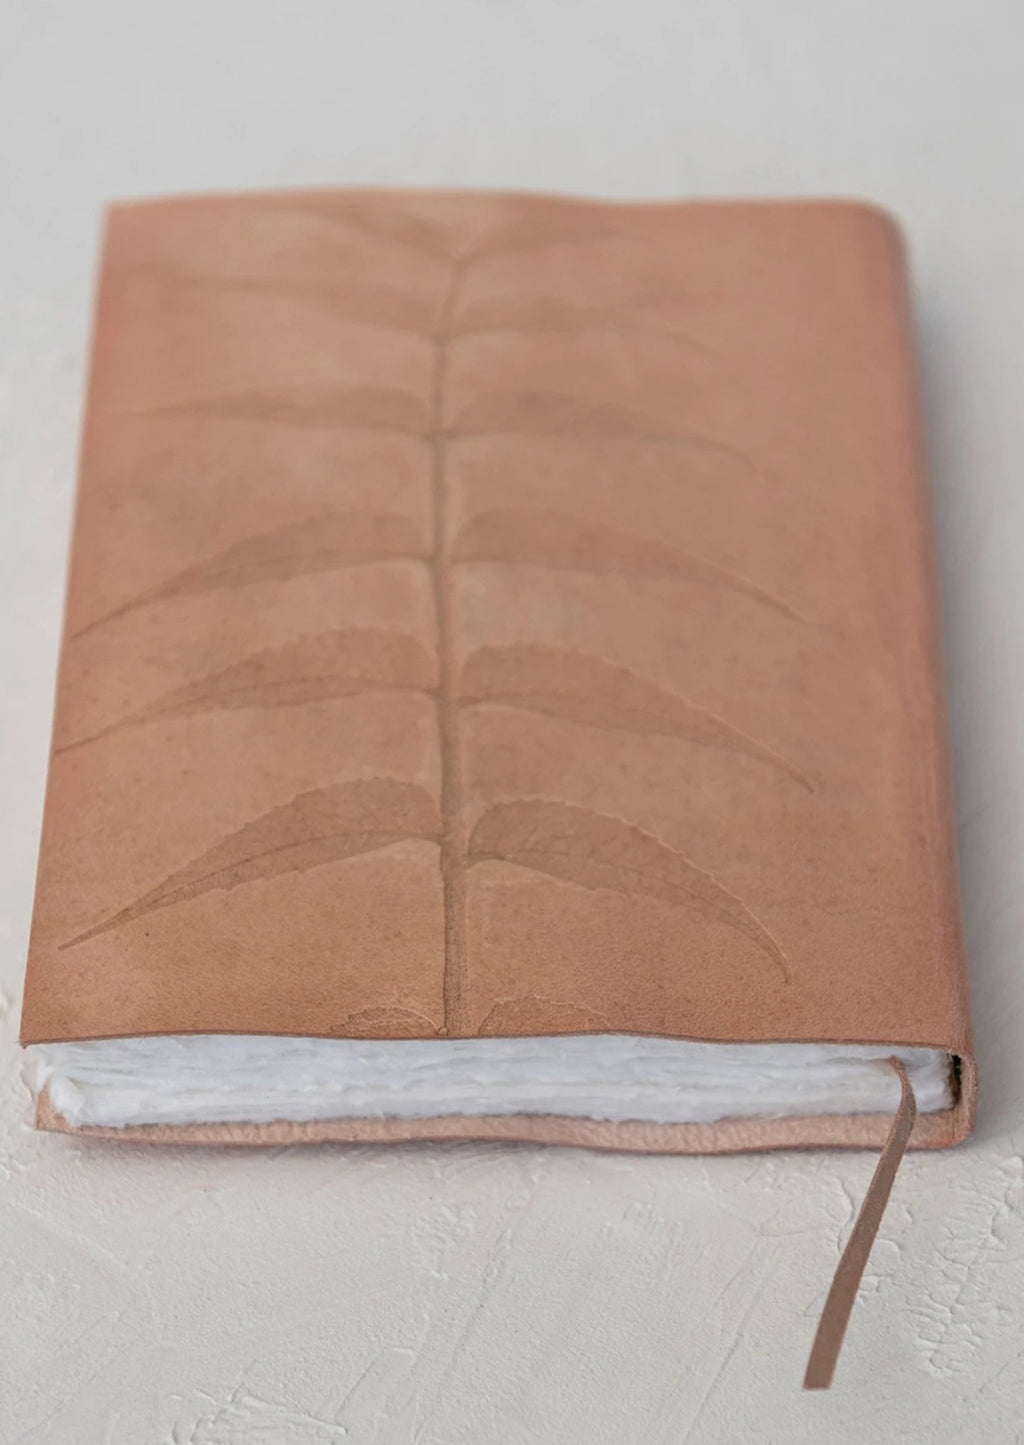 3: A natural leather journal with embossed leaf design.